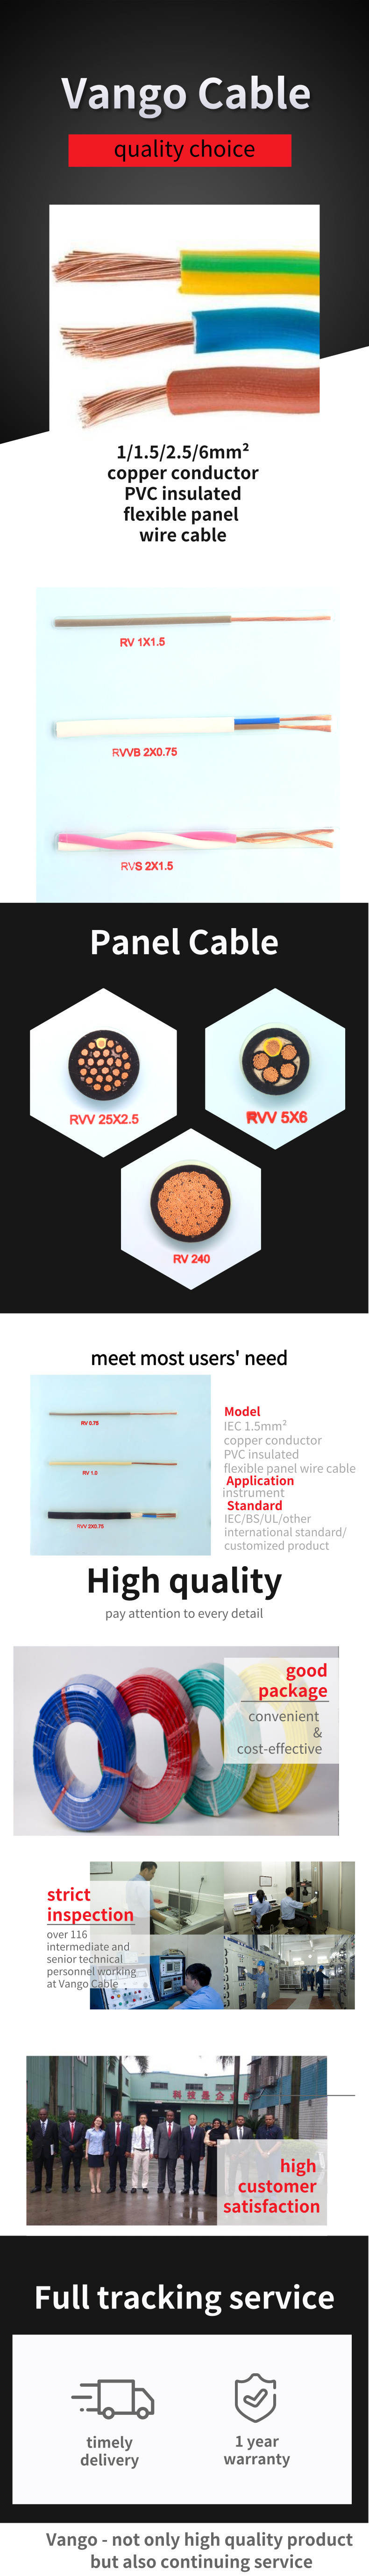 IEC Copper Conductor PVC Insulated Flexible Panel Wire Cable